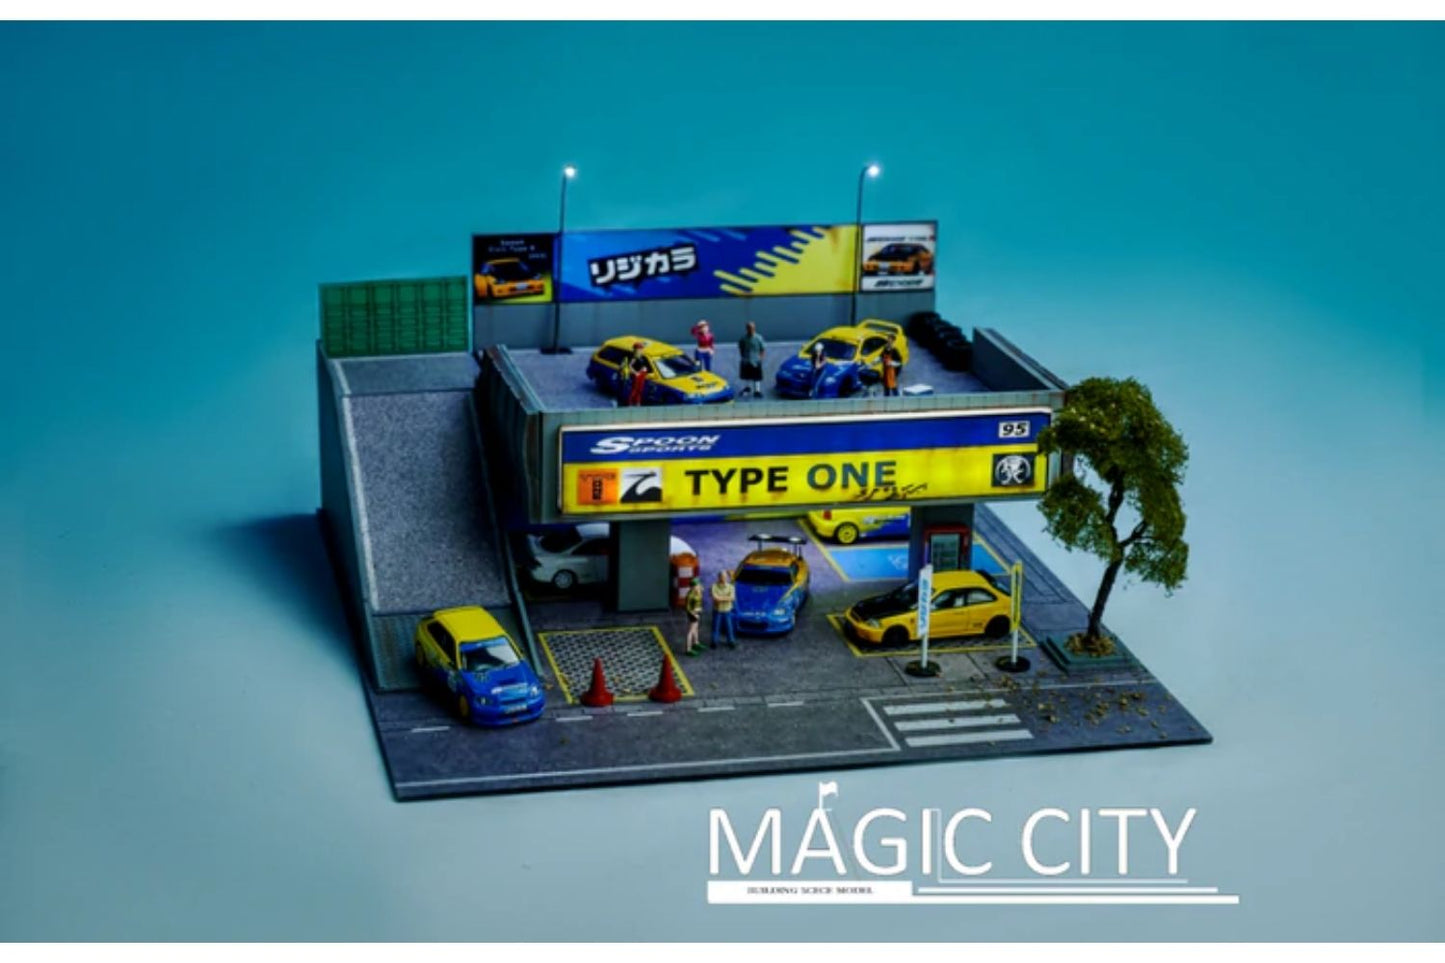 Magic City 1/64 Scale Spoon Sports / Type One Two Story Car Park